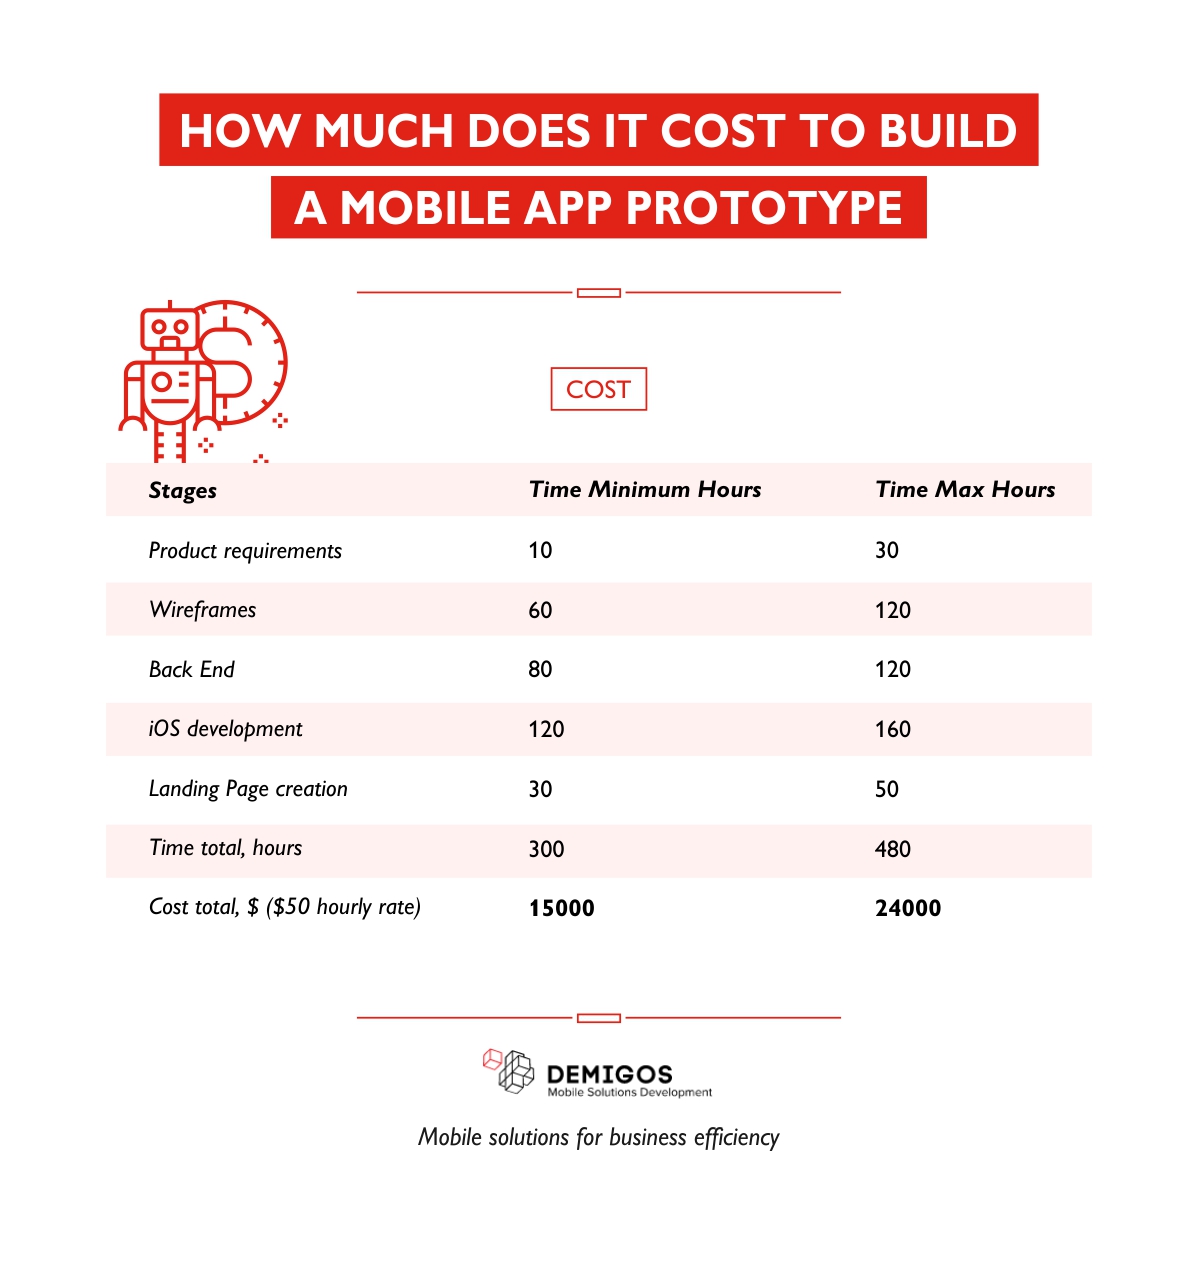 How Much Does it Cost to Build a Mobile App Prototype